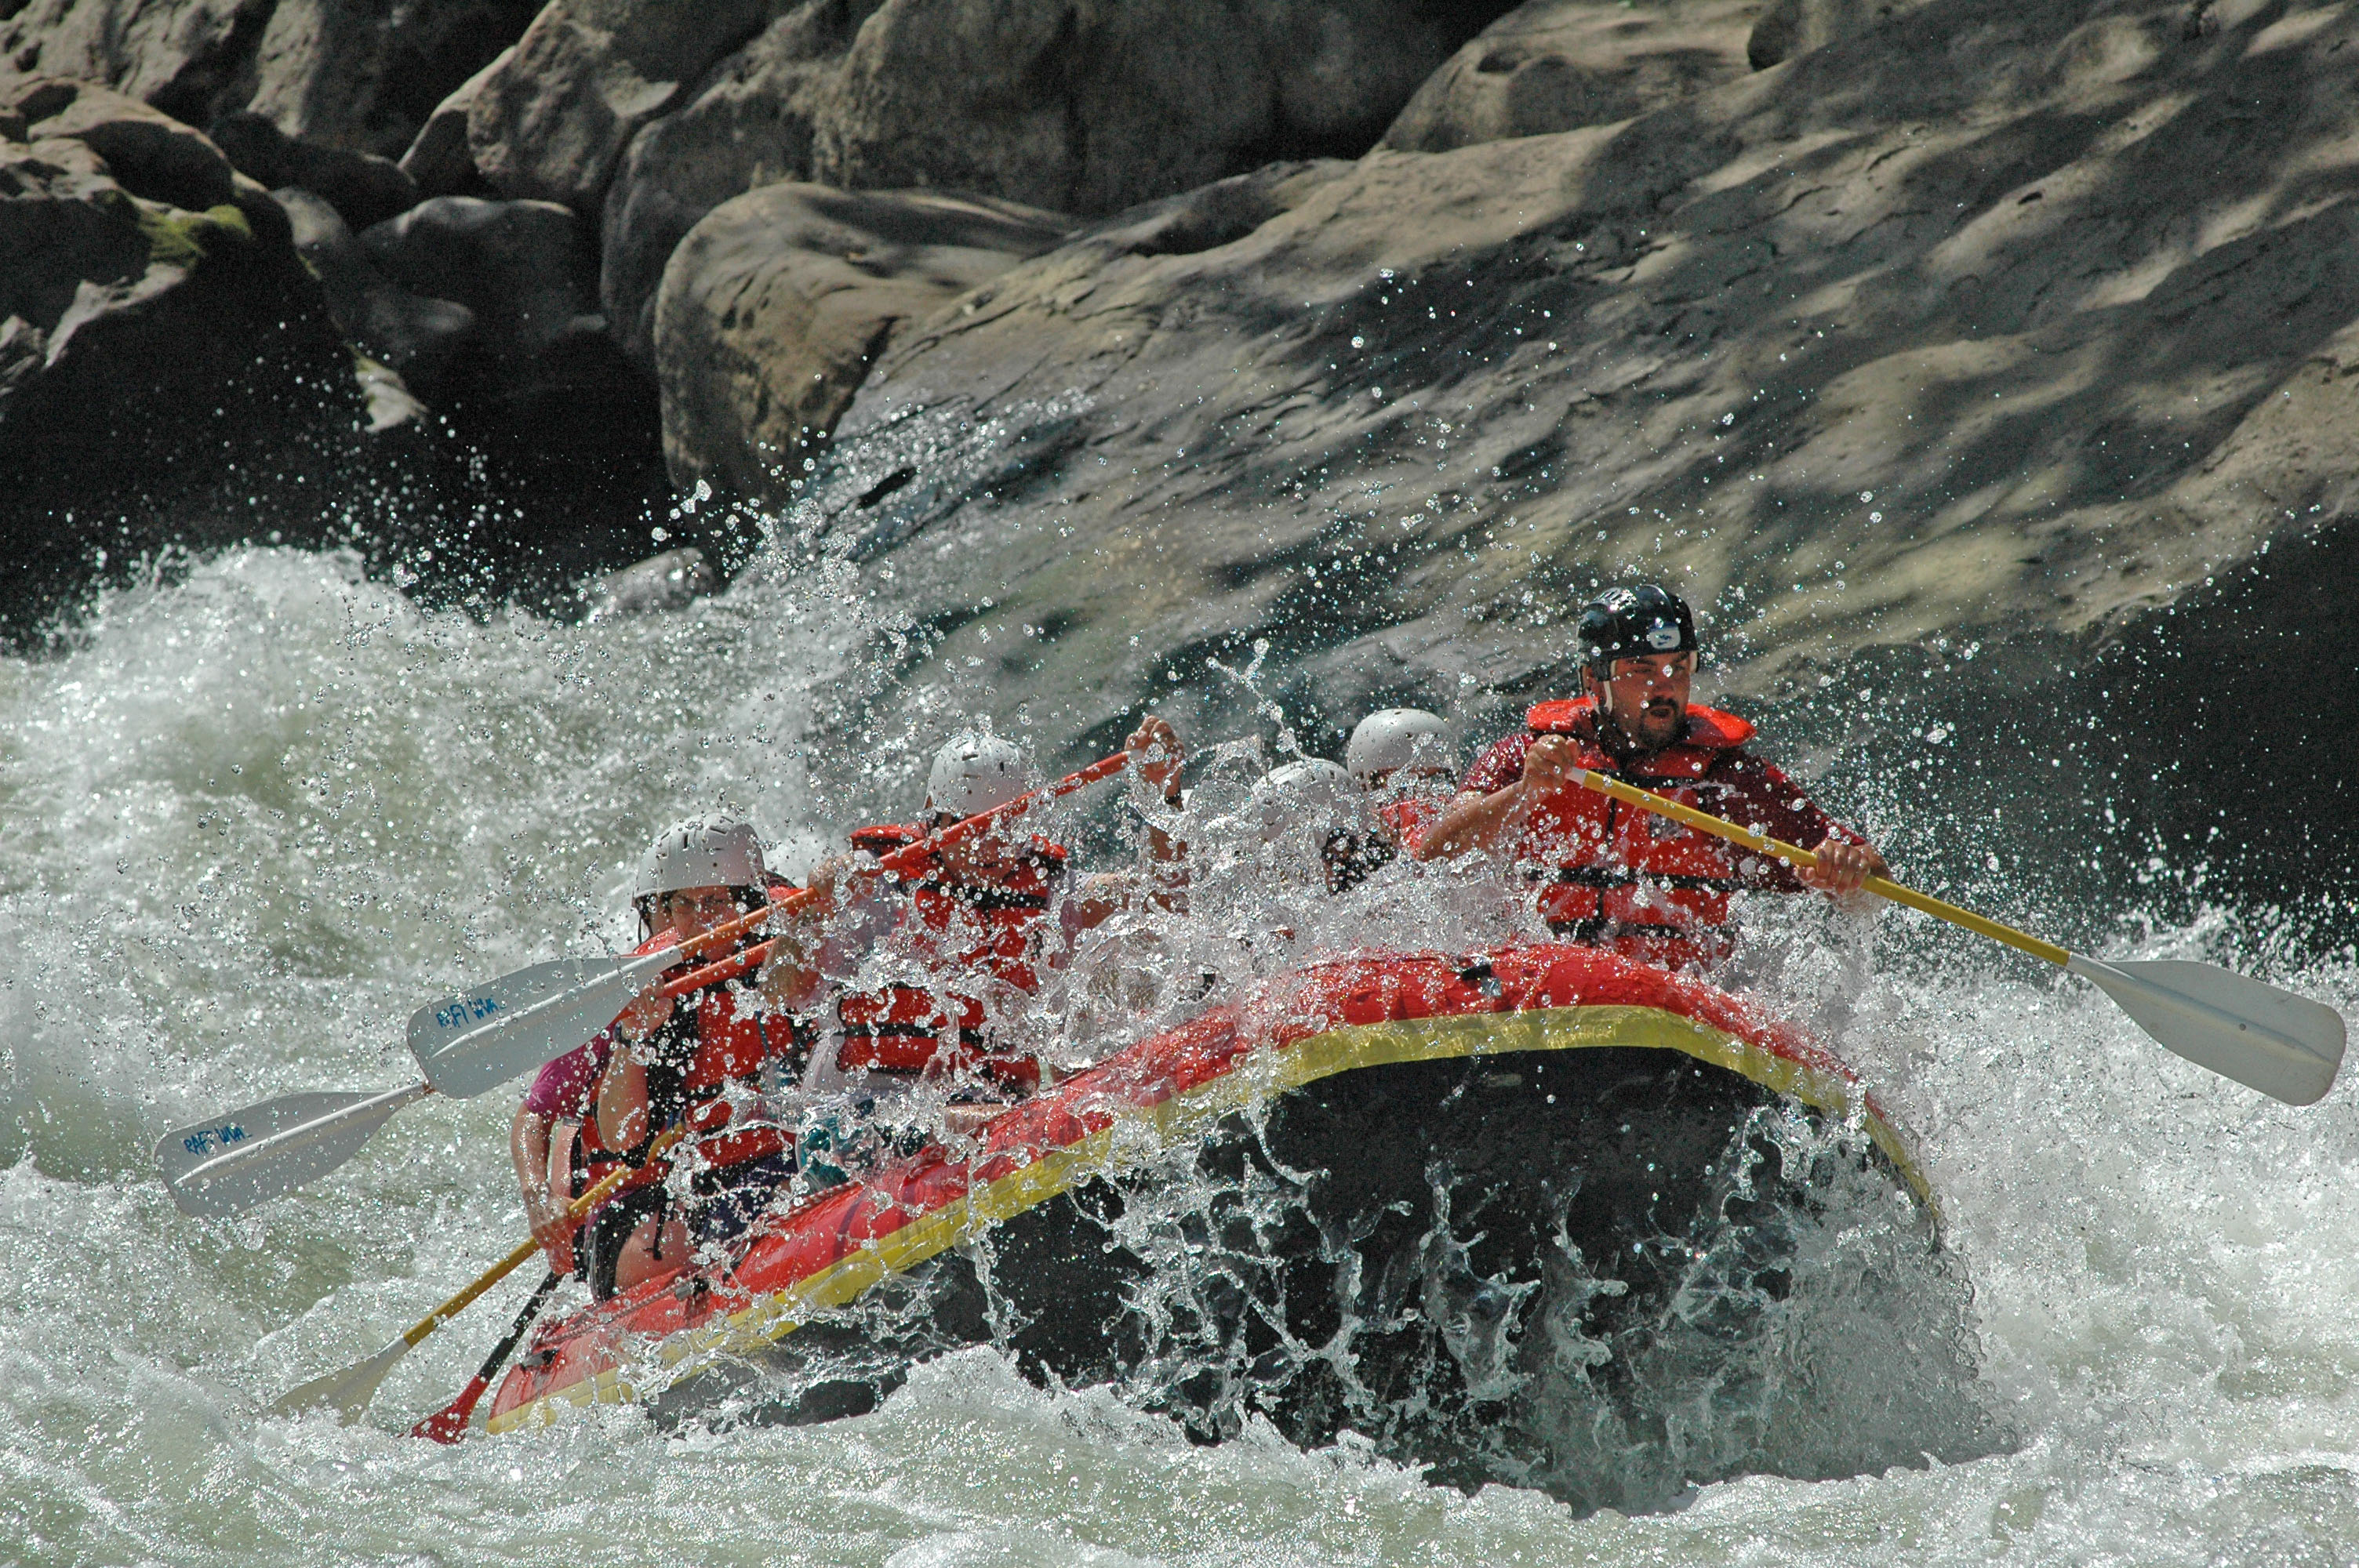 Rafters enjoying the Gauley River